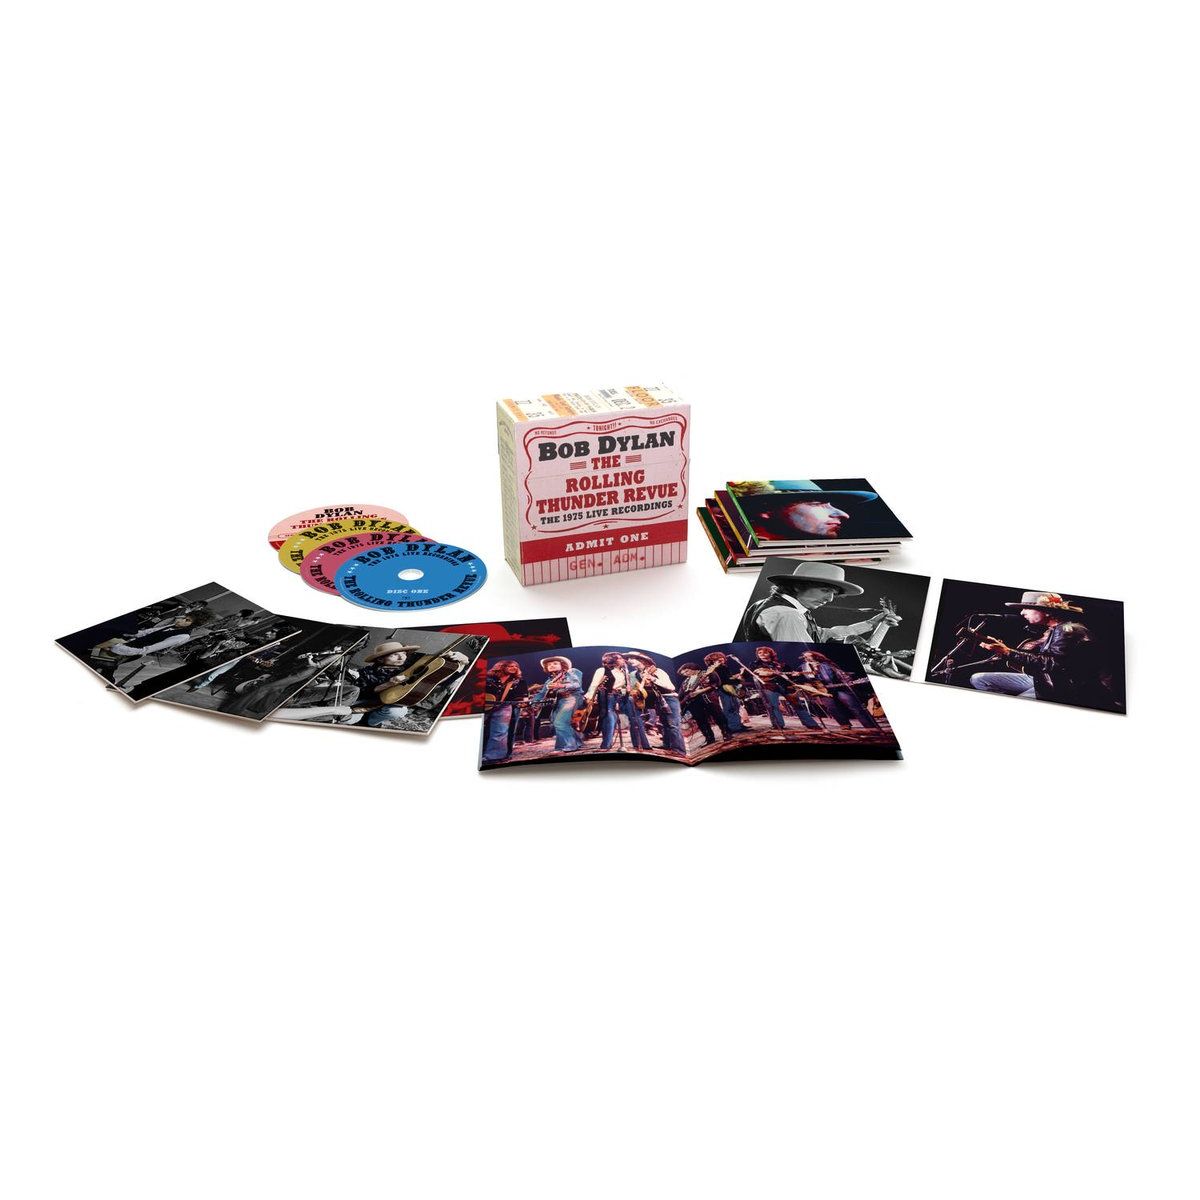 BOB DYLAN / ボブ・ディラン / THE ROLLING THUNDER REVUE: THE 1975 LIVE RECORDINGS (14CD BOX)